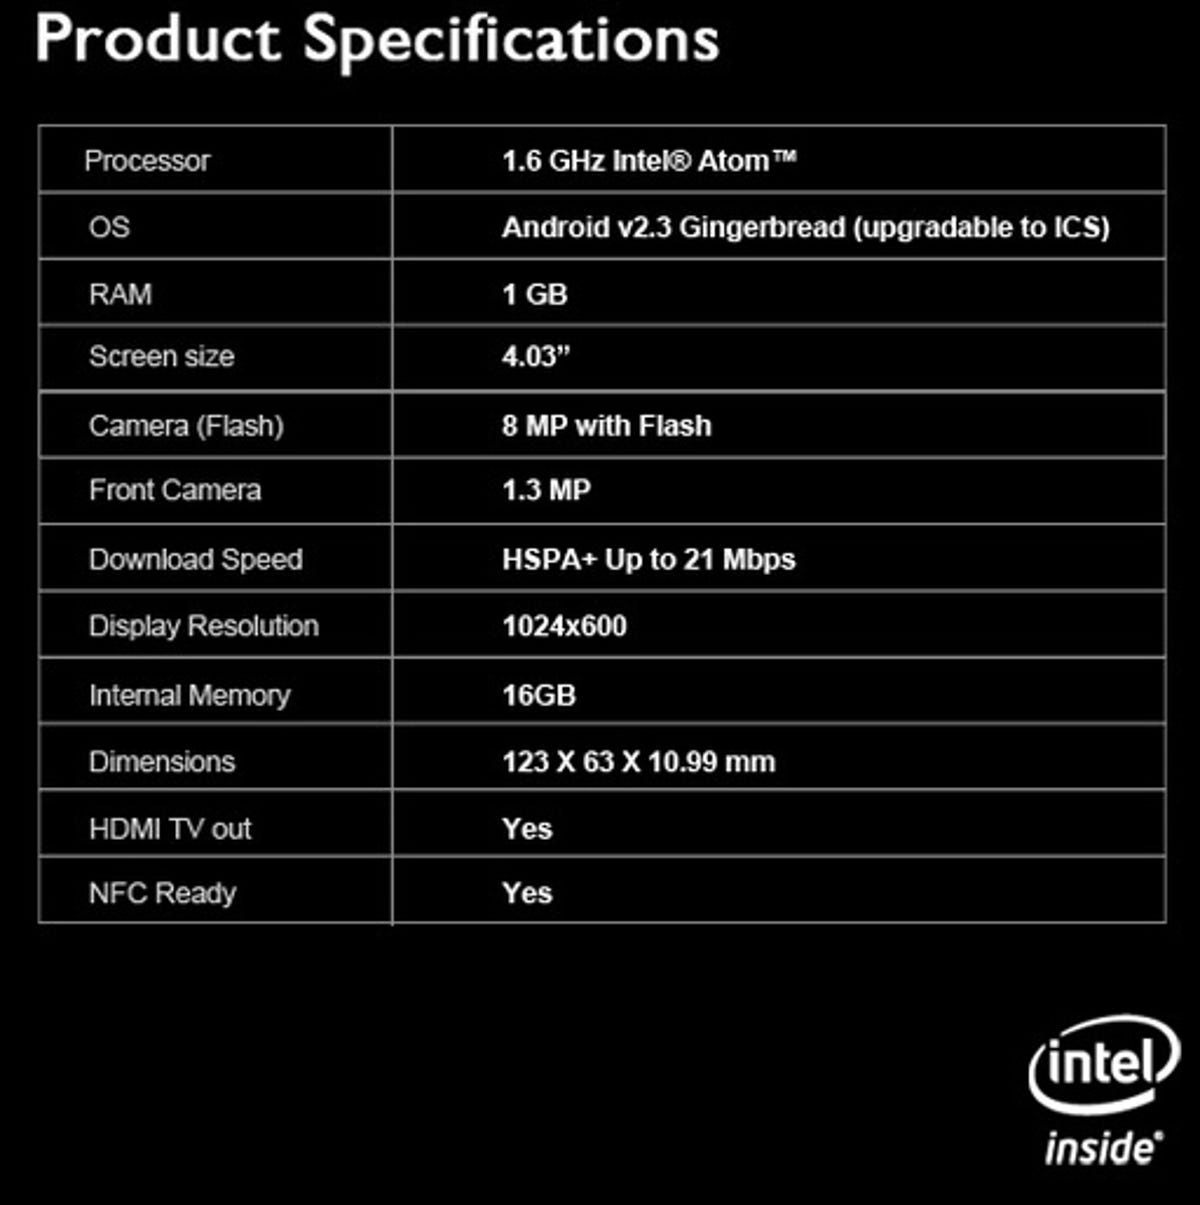 Xolo specifications.